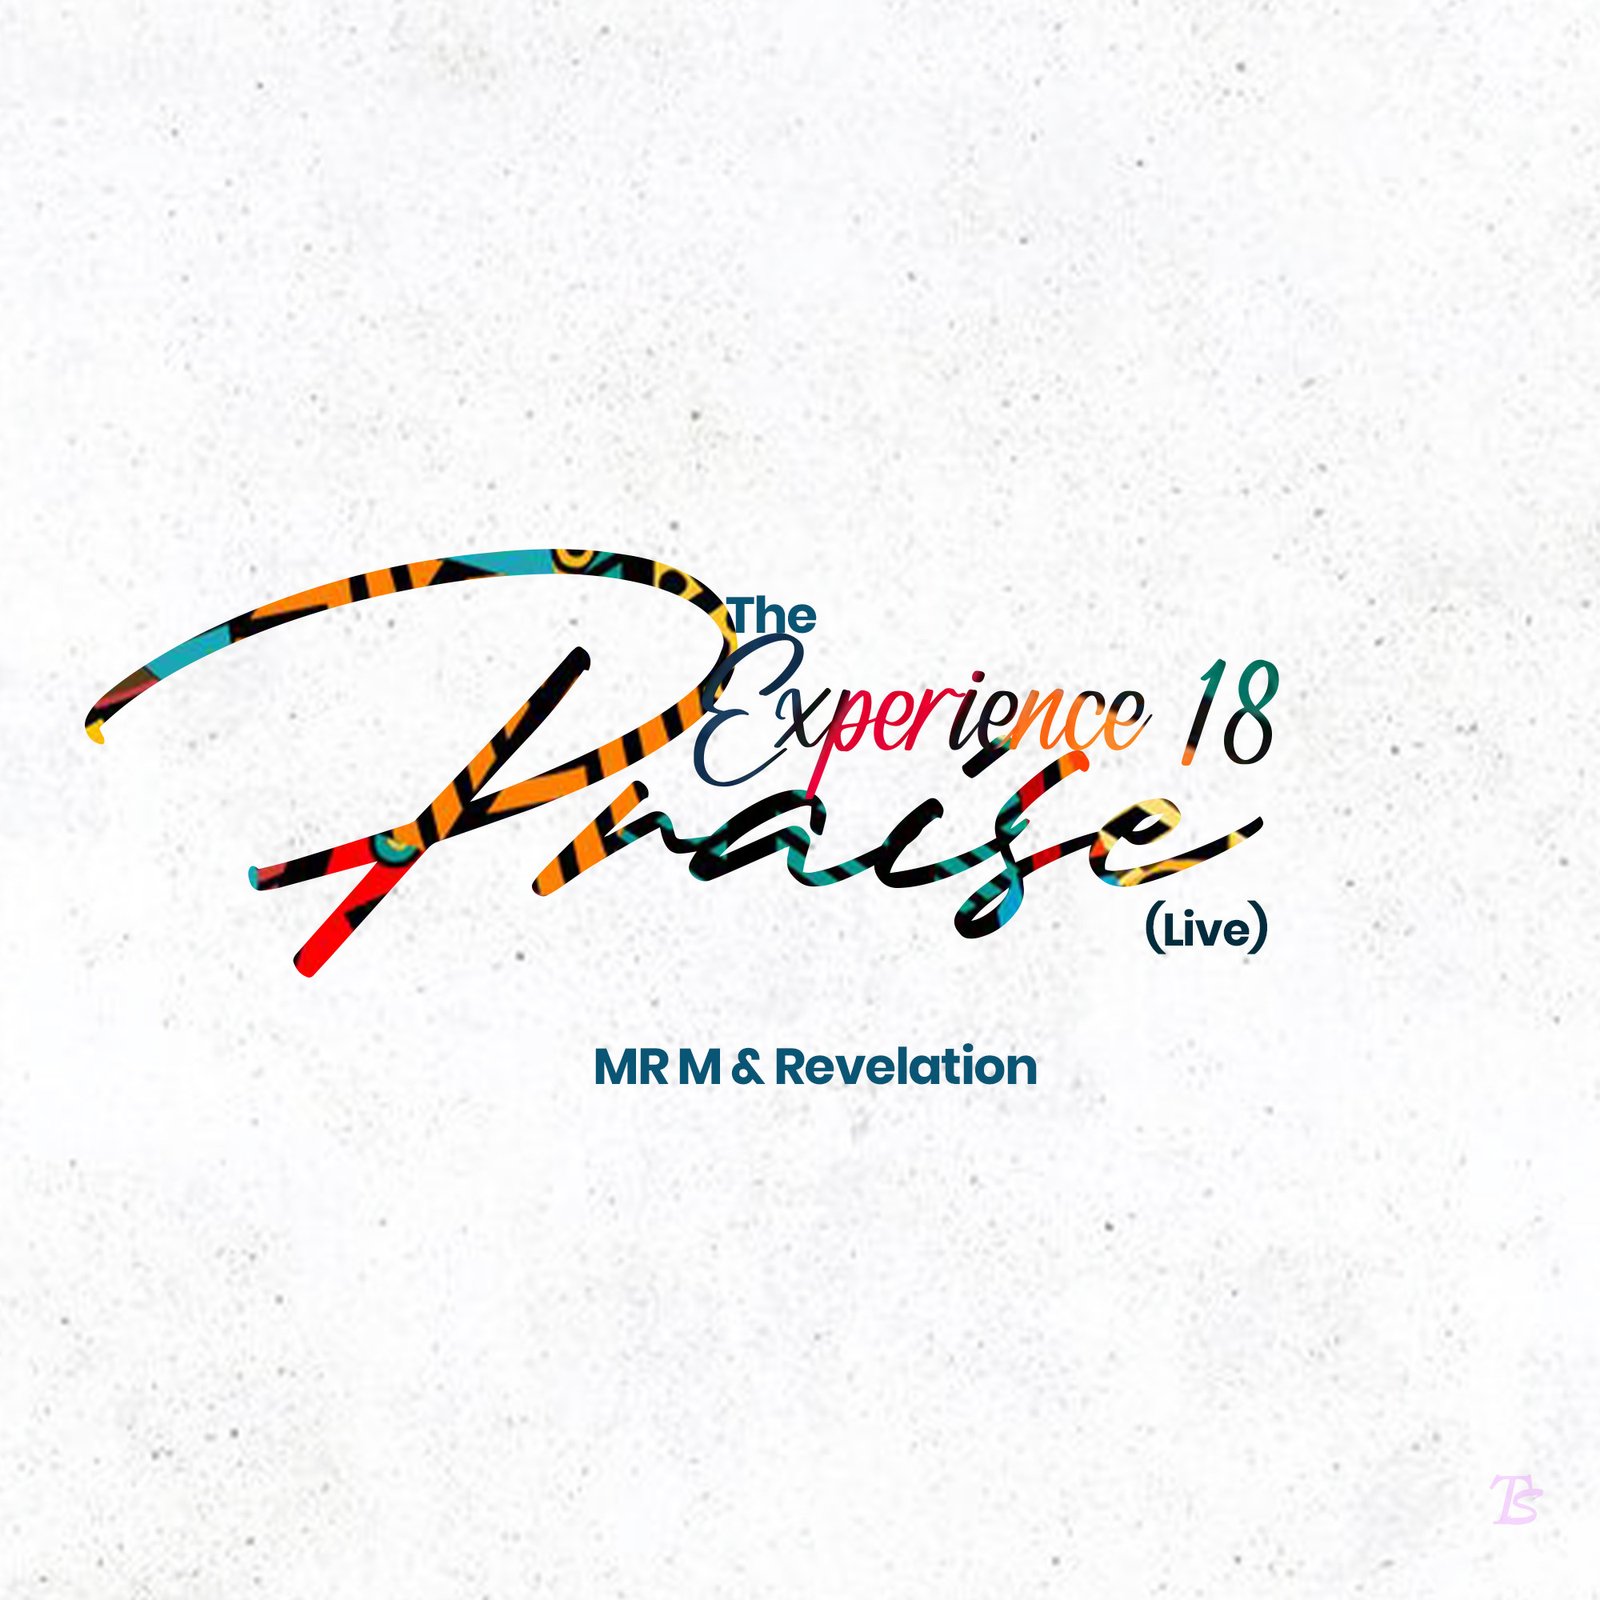 MR M & REVELATION RELEASED THE EXPERIENCE 18 PRAISE (LIVE)